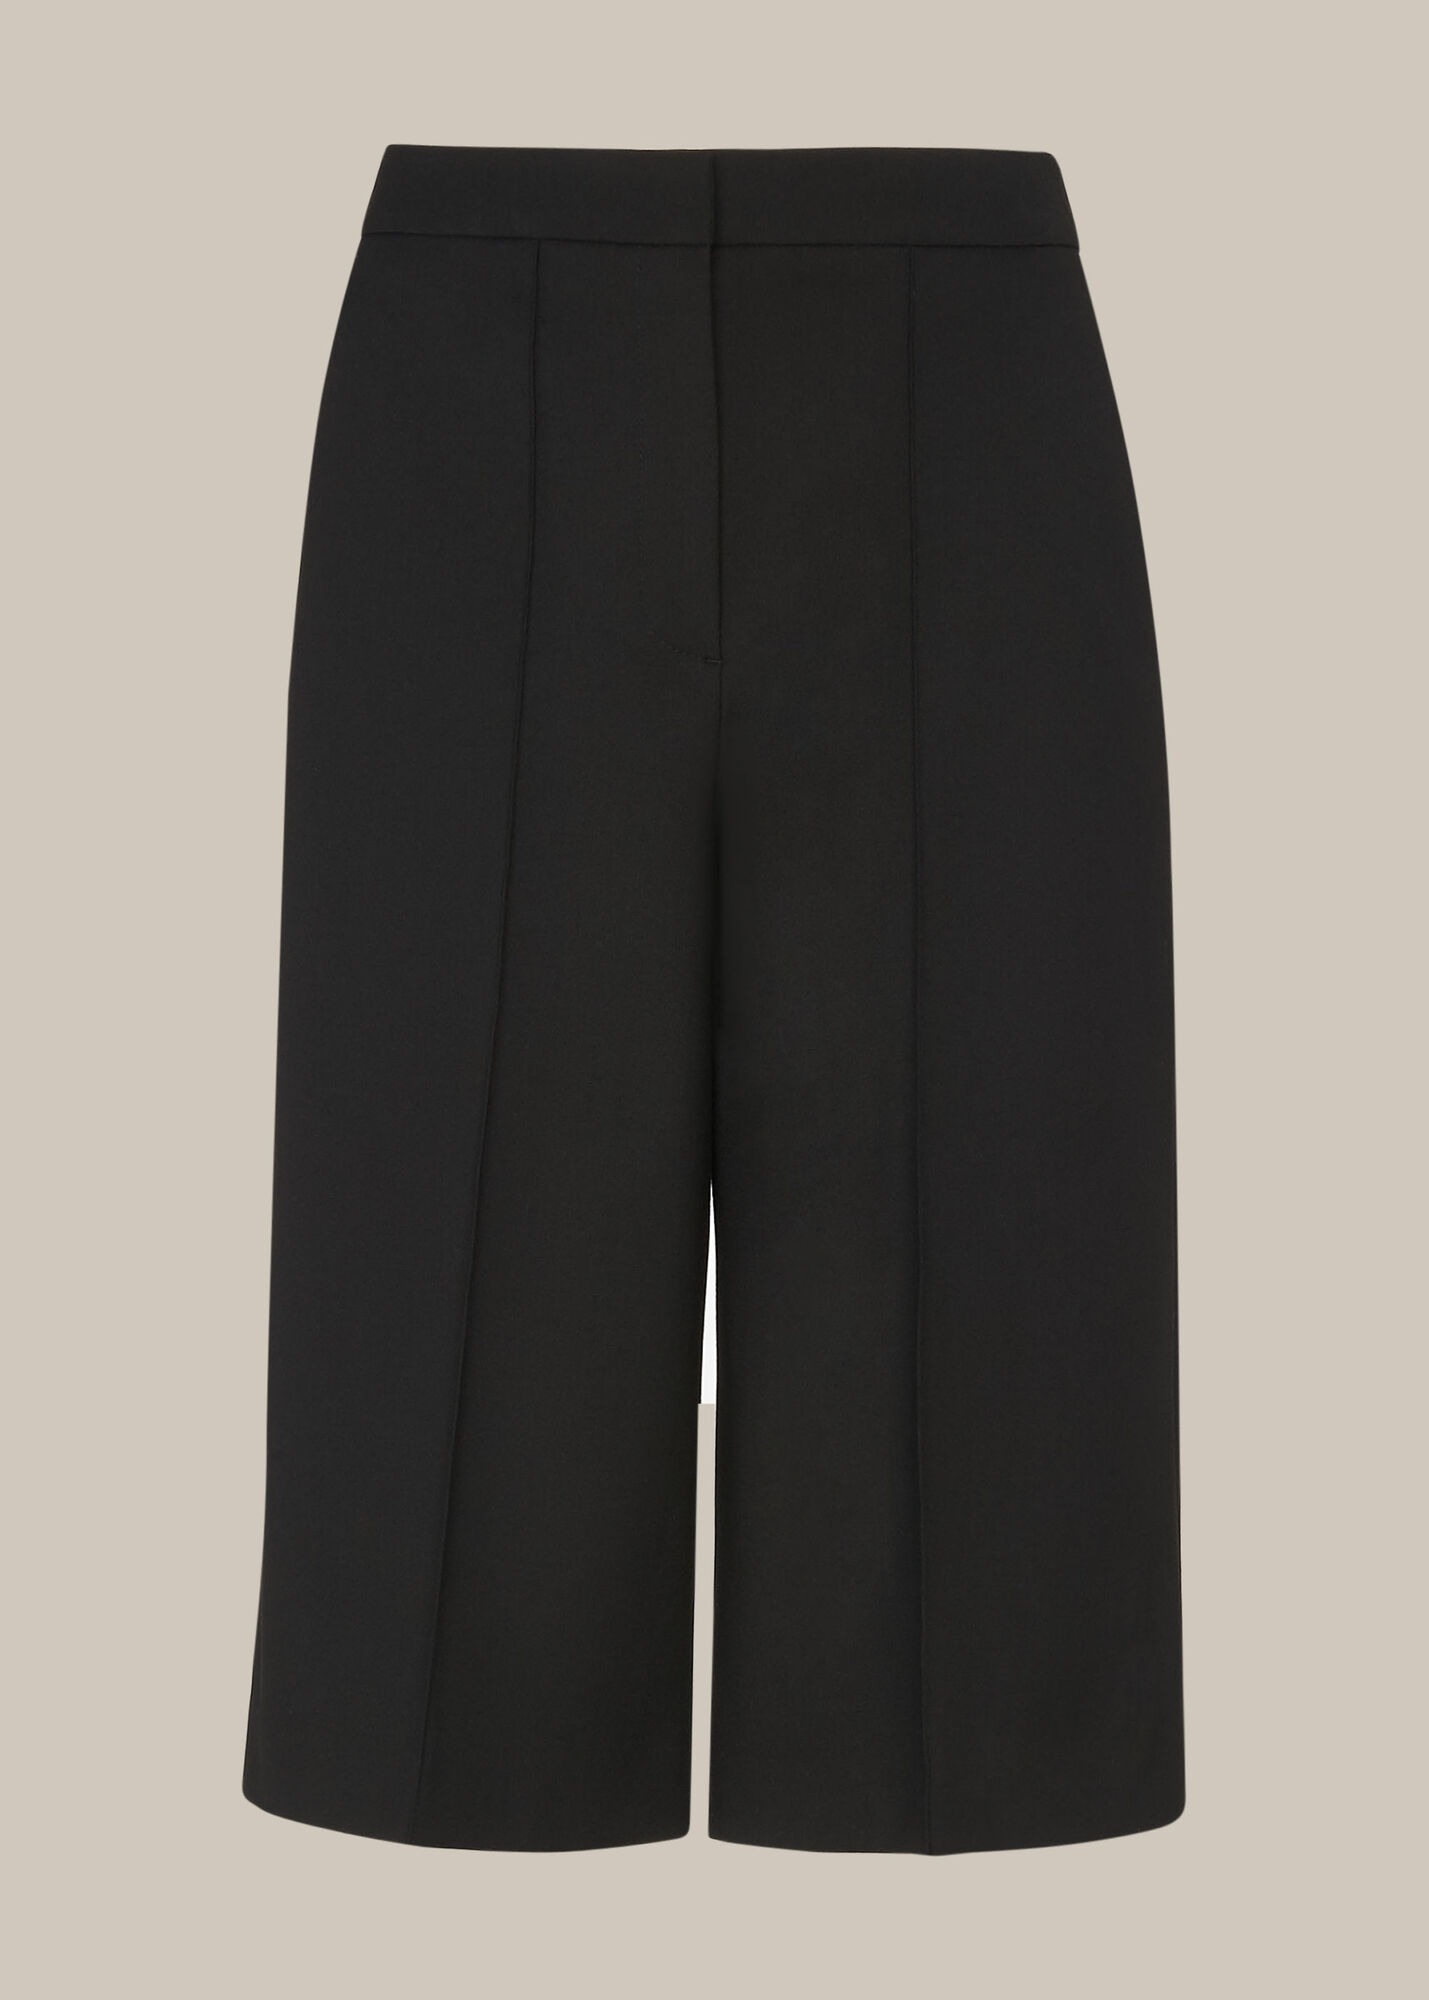 Black Tailored Culotte | WHISTLES